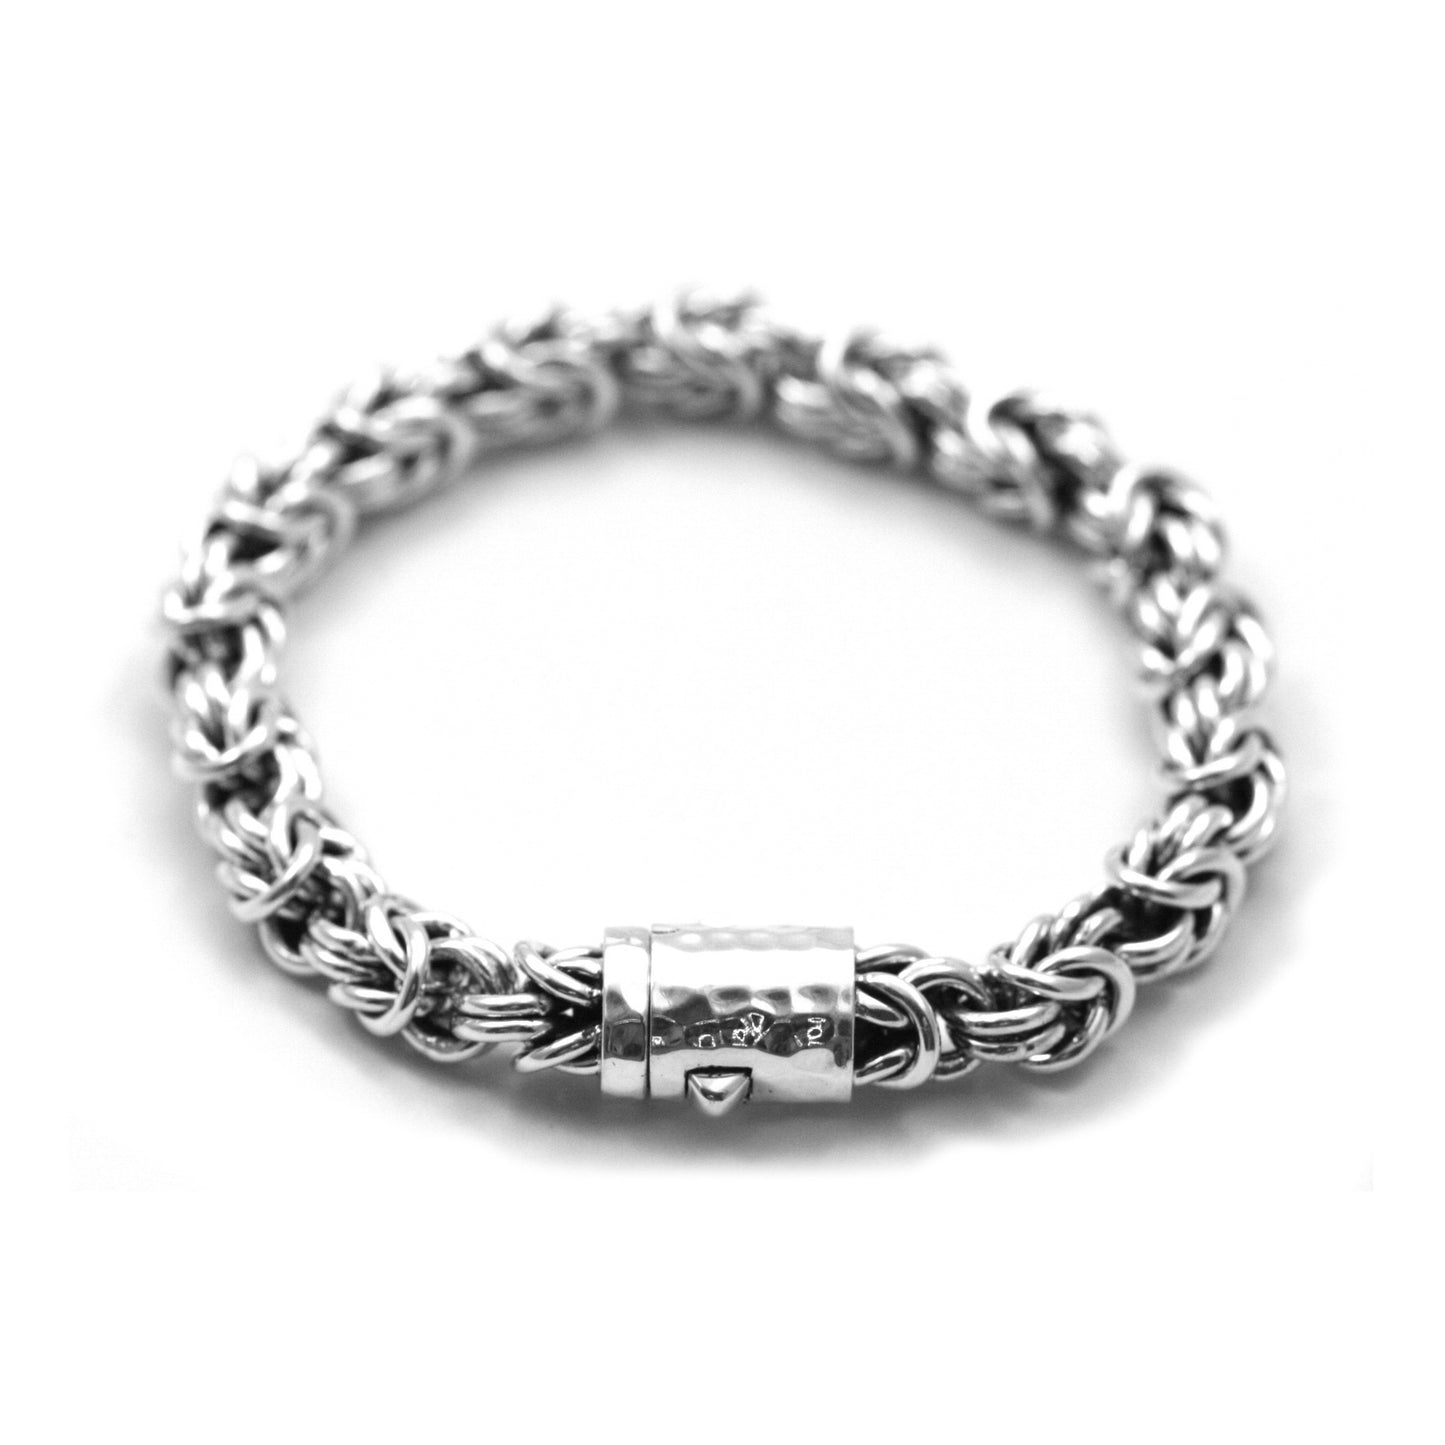 Heavy open link silver byzantine bracelet with a hammered barrel clasp.